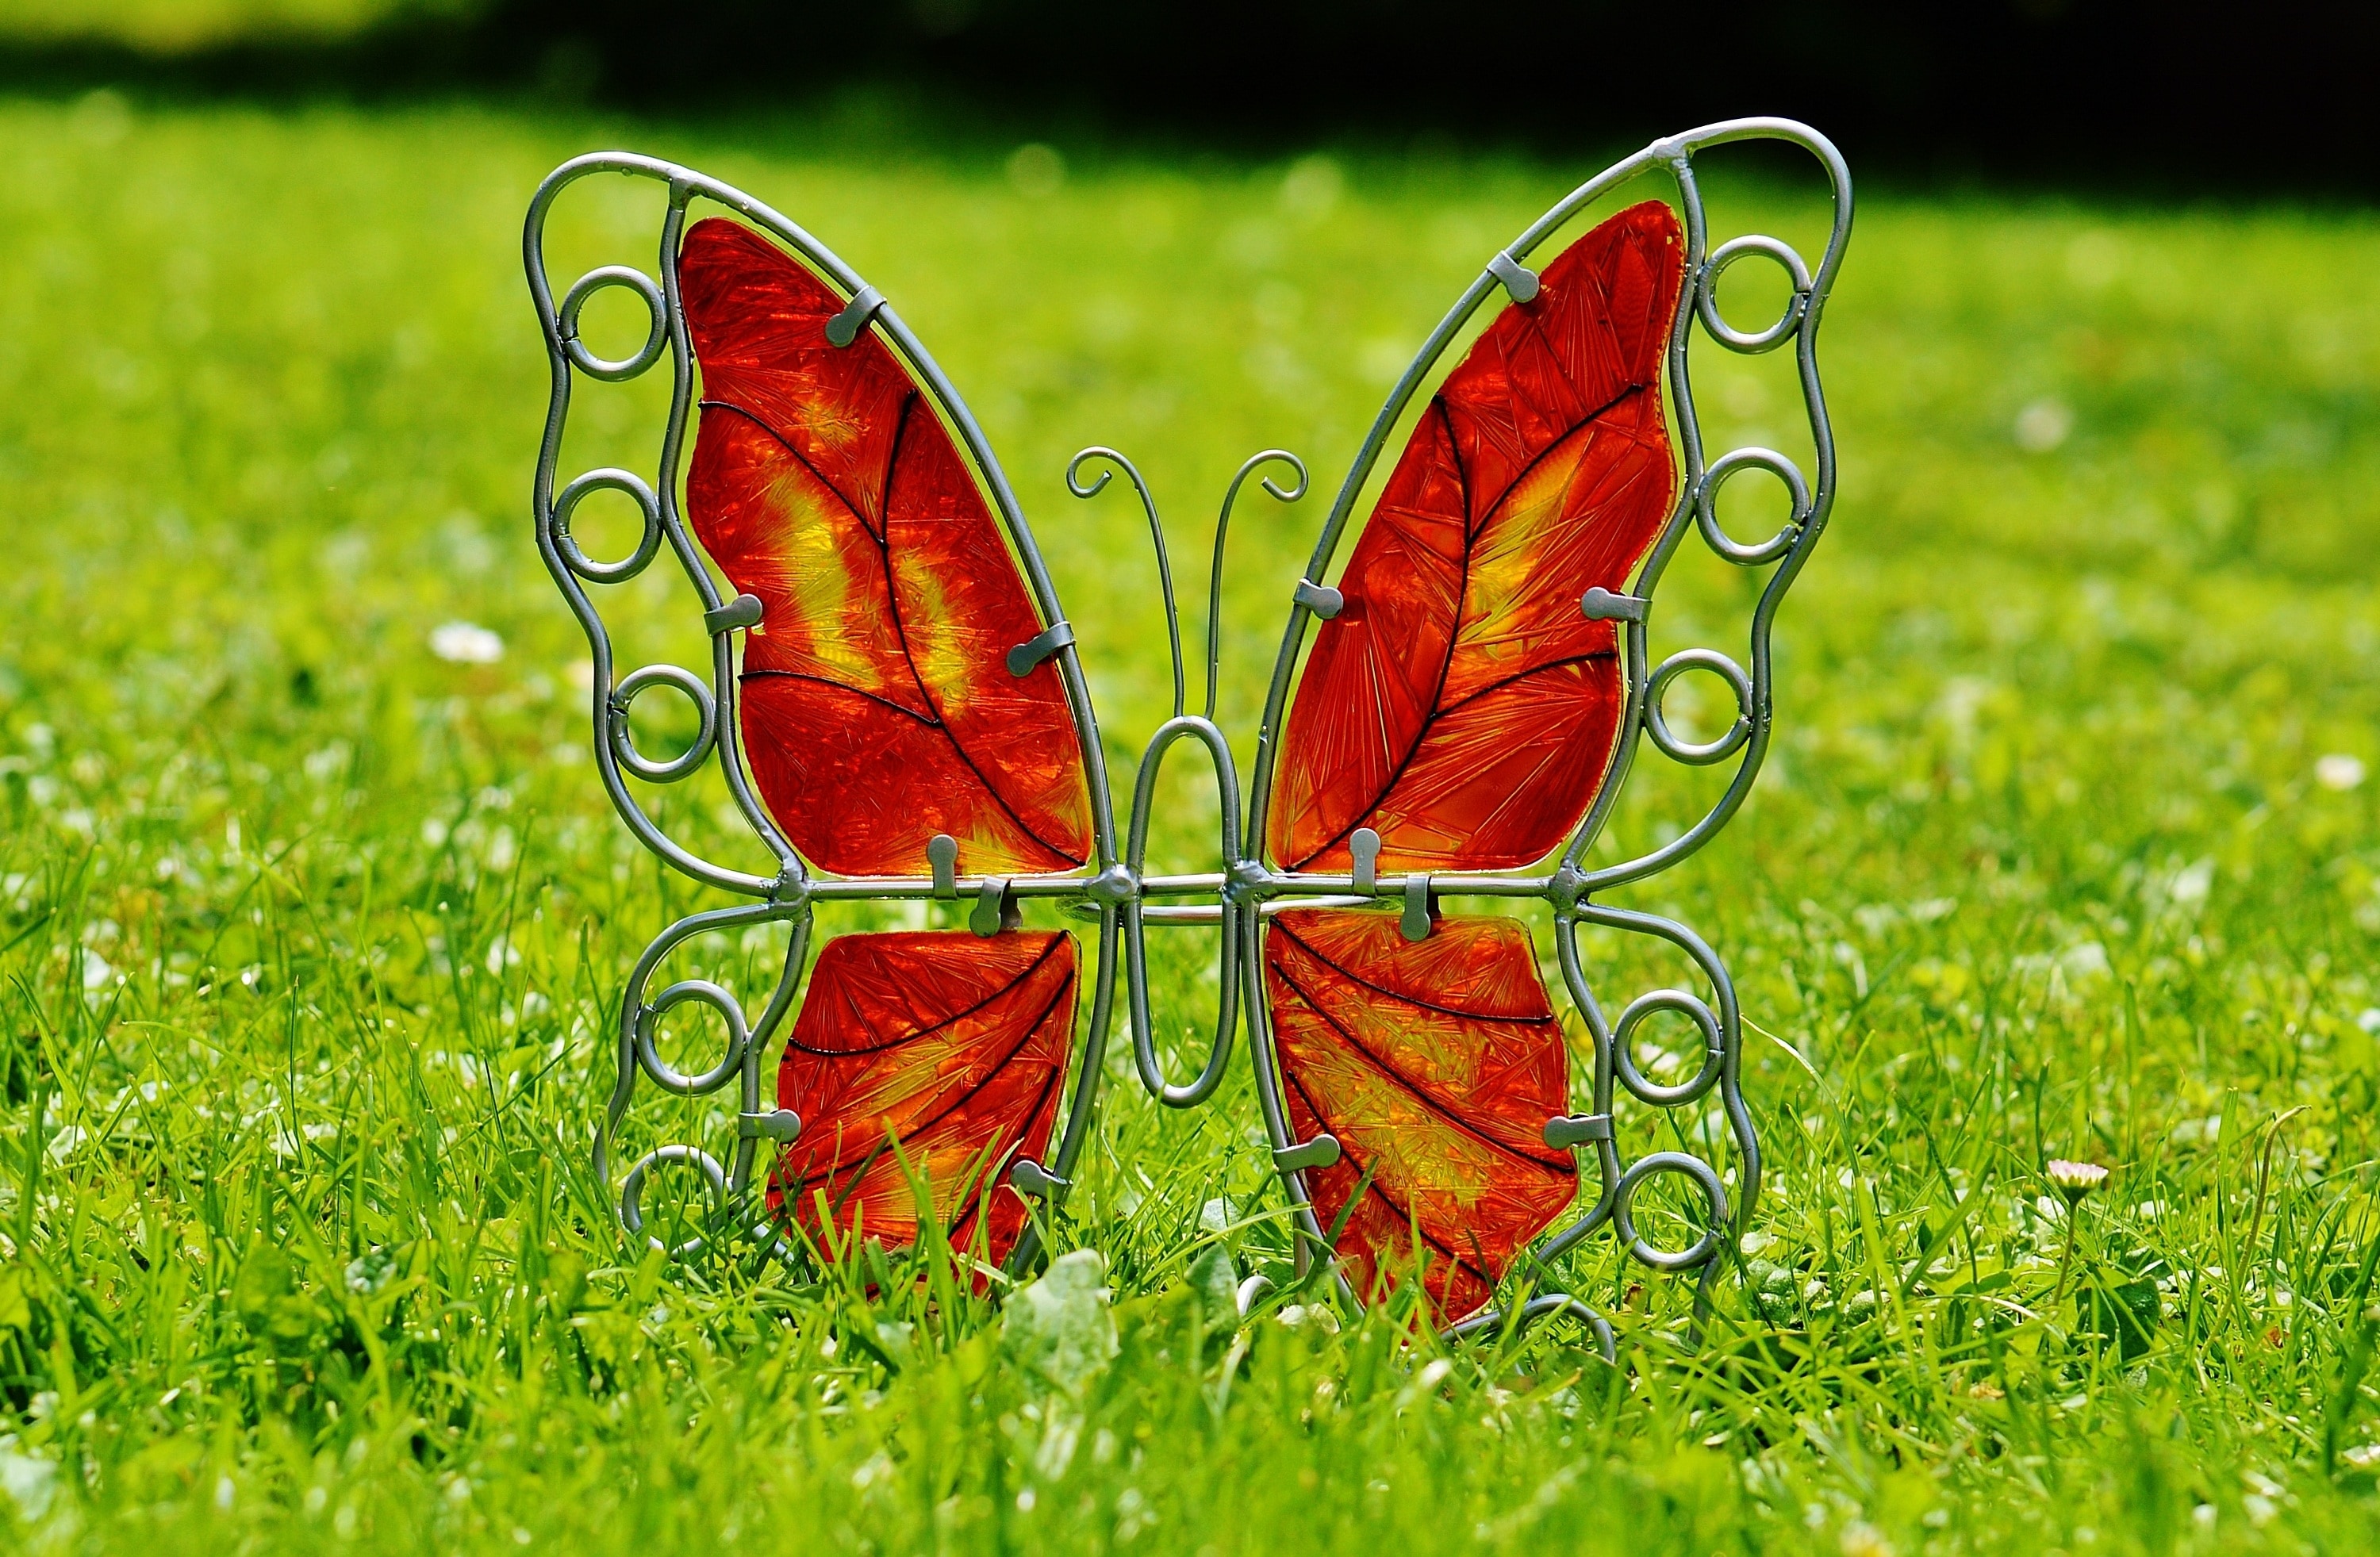 Decoration, Butterfly, Metal, Glass, grass, green color